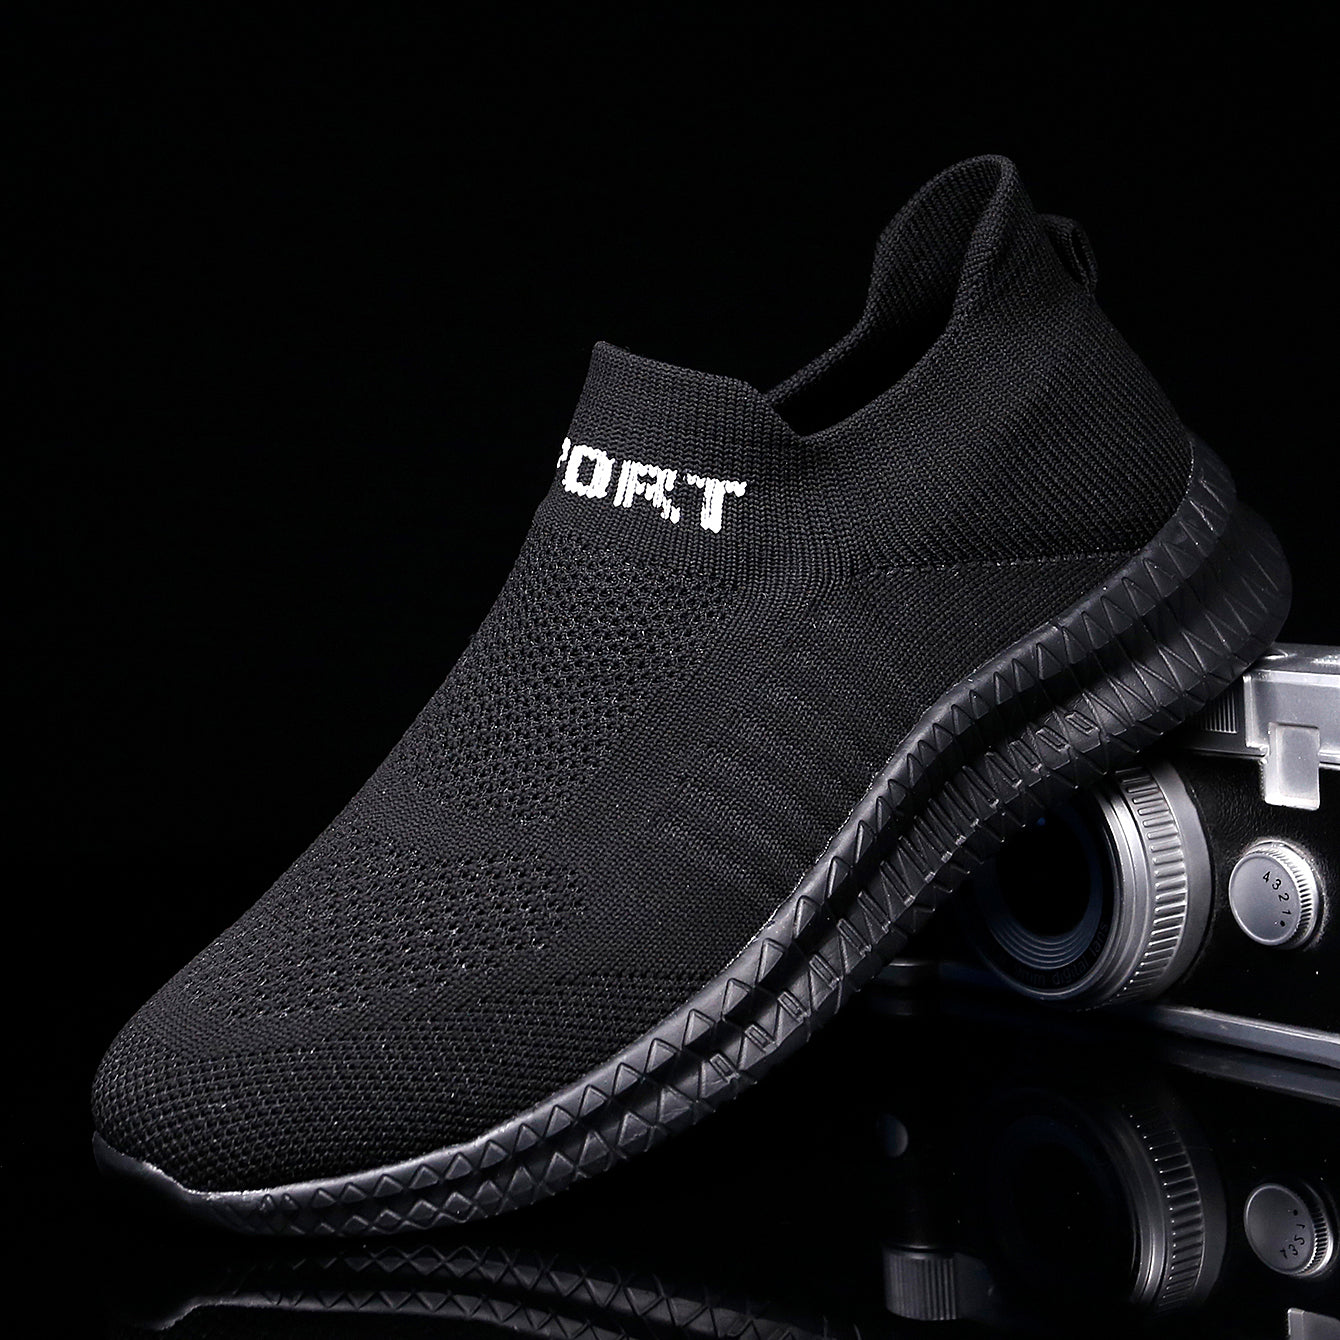 Knit Breathable Slip On Running Shoes, Comfy Sneaker